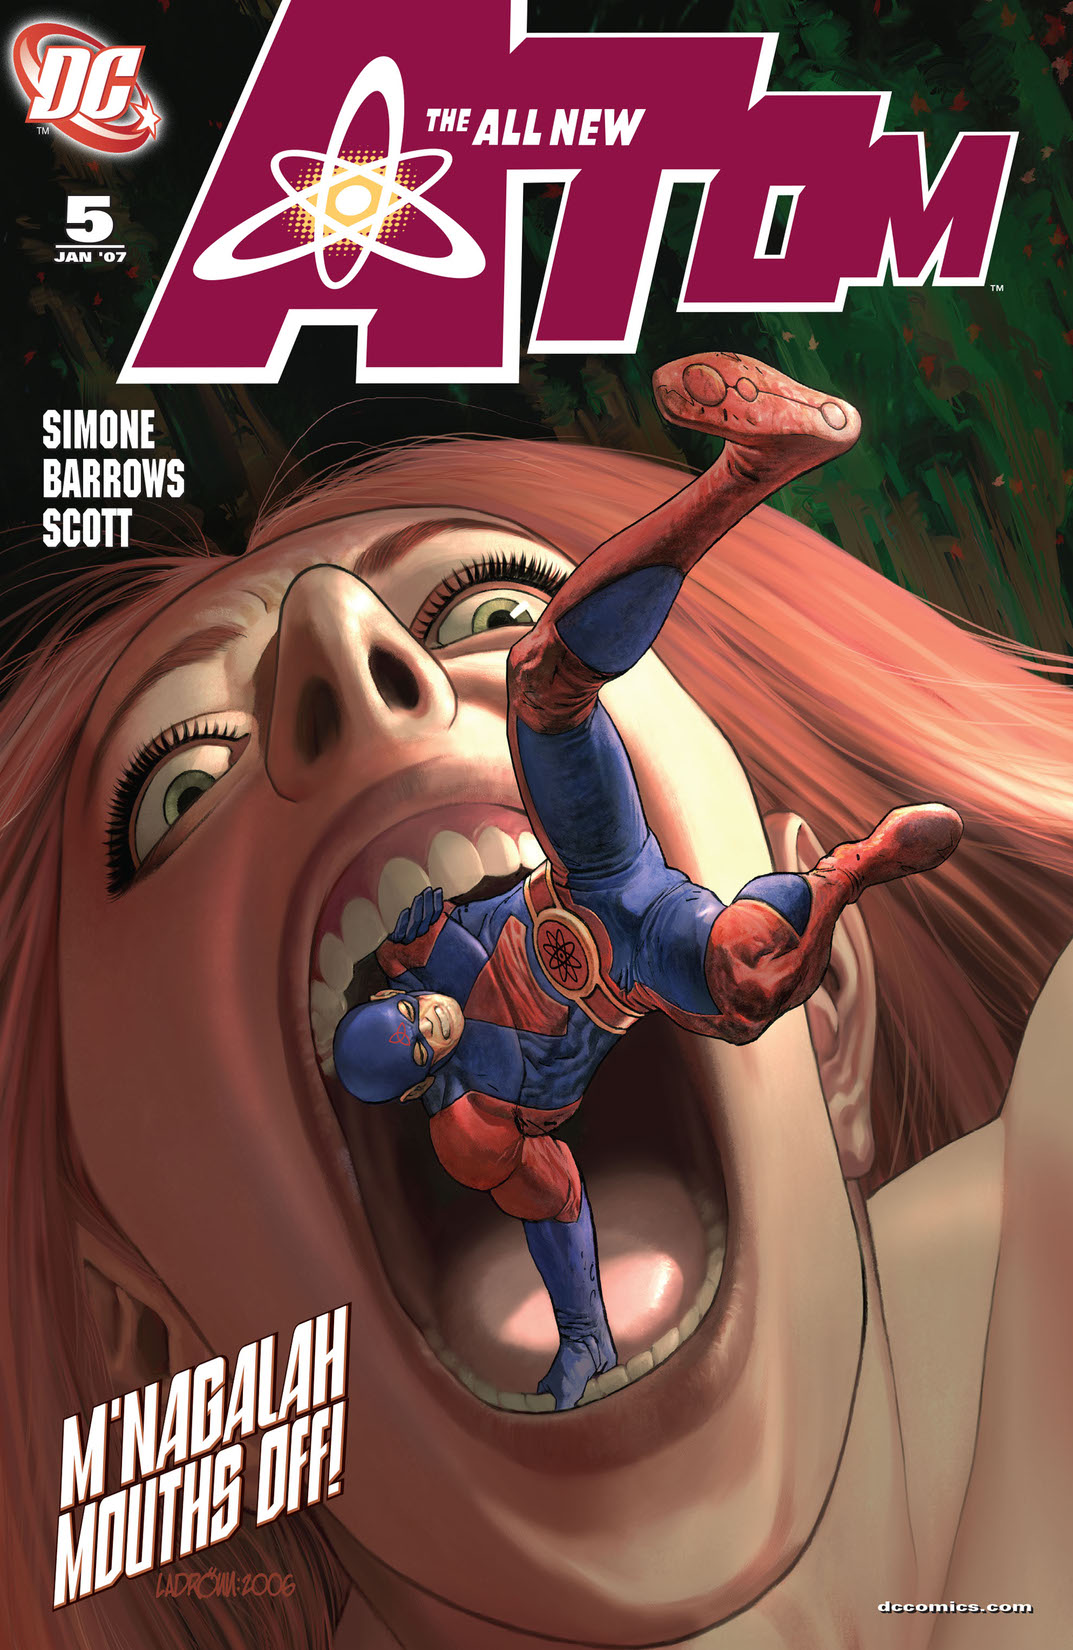 The All New Atom #5 preview images